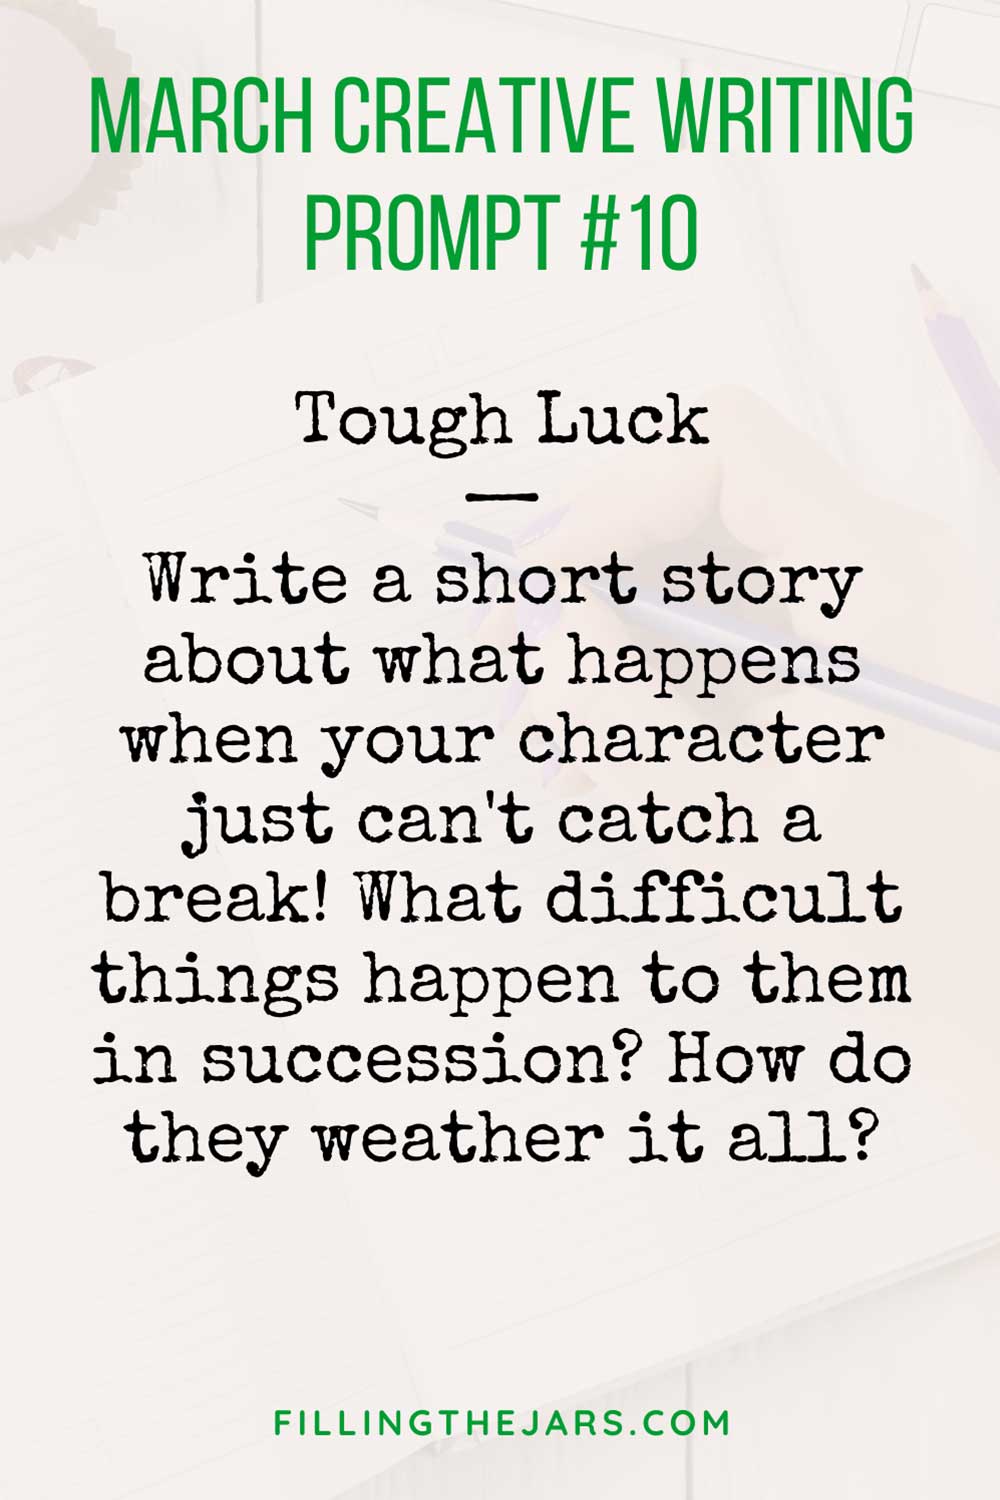 Writing prompt for March in green and black text on light background.